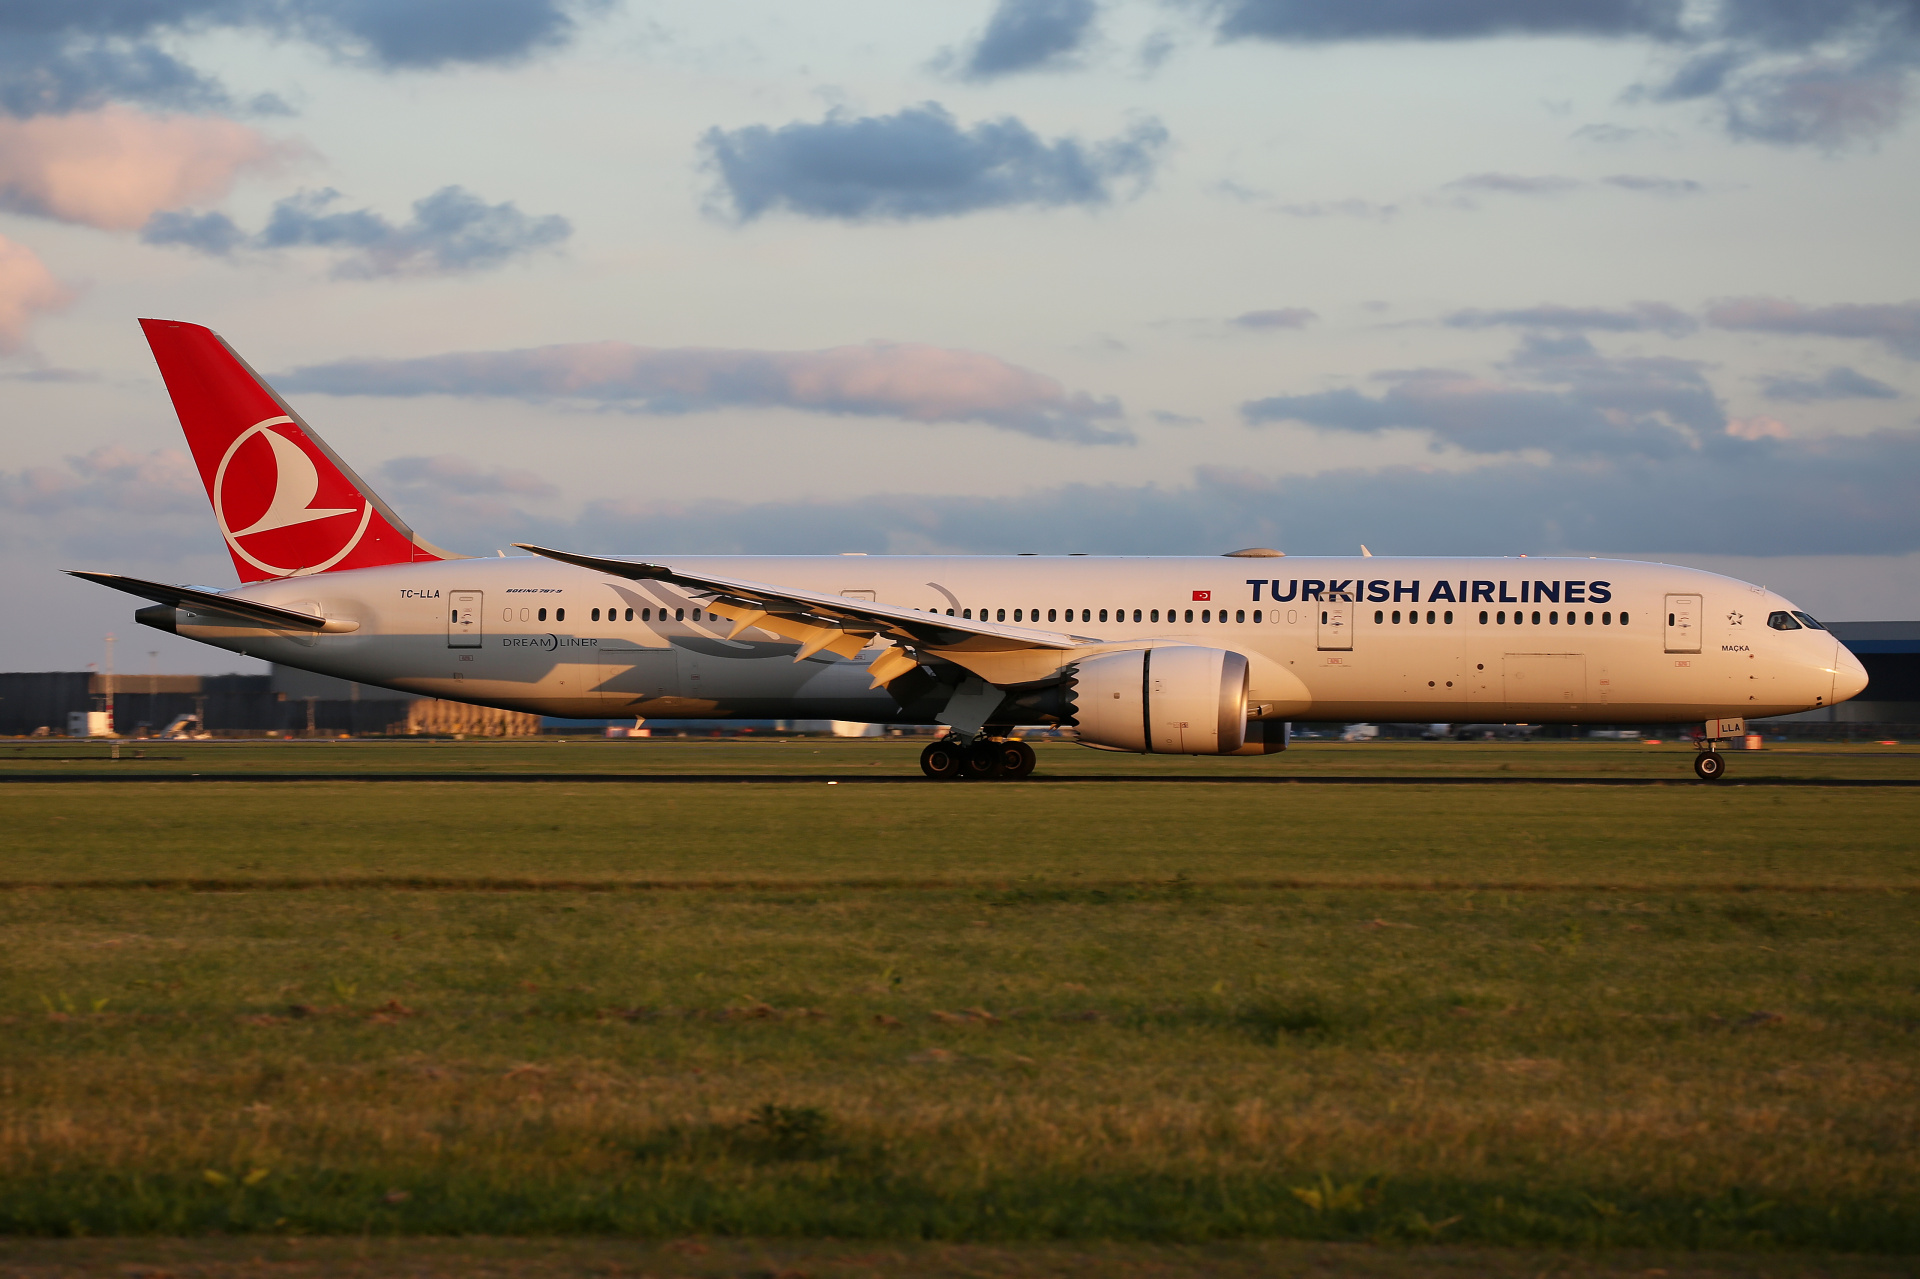 TC-LLA, THY Turkish Airlines (Aircraft » Schiphol Spotting » Boeing 787-9 Dreamliner)